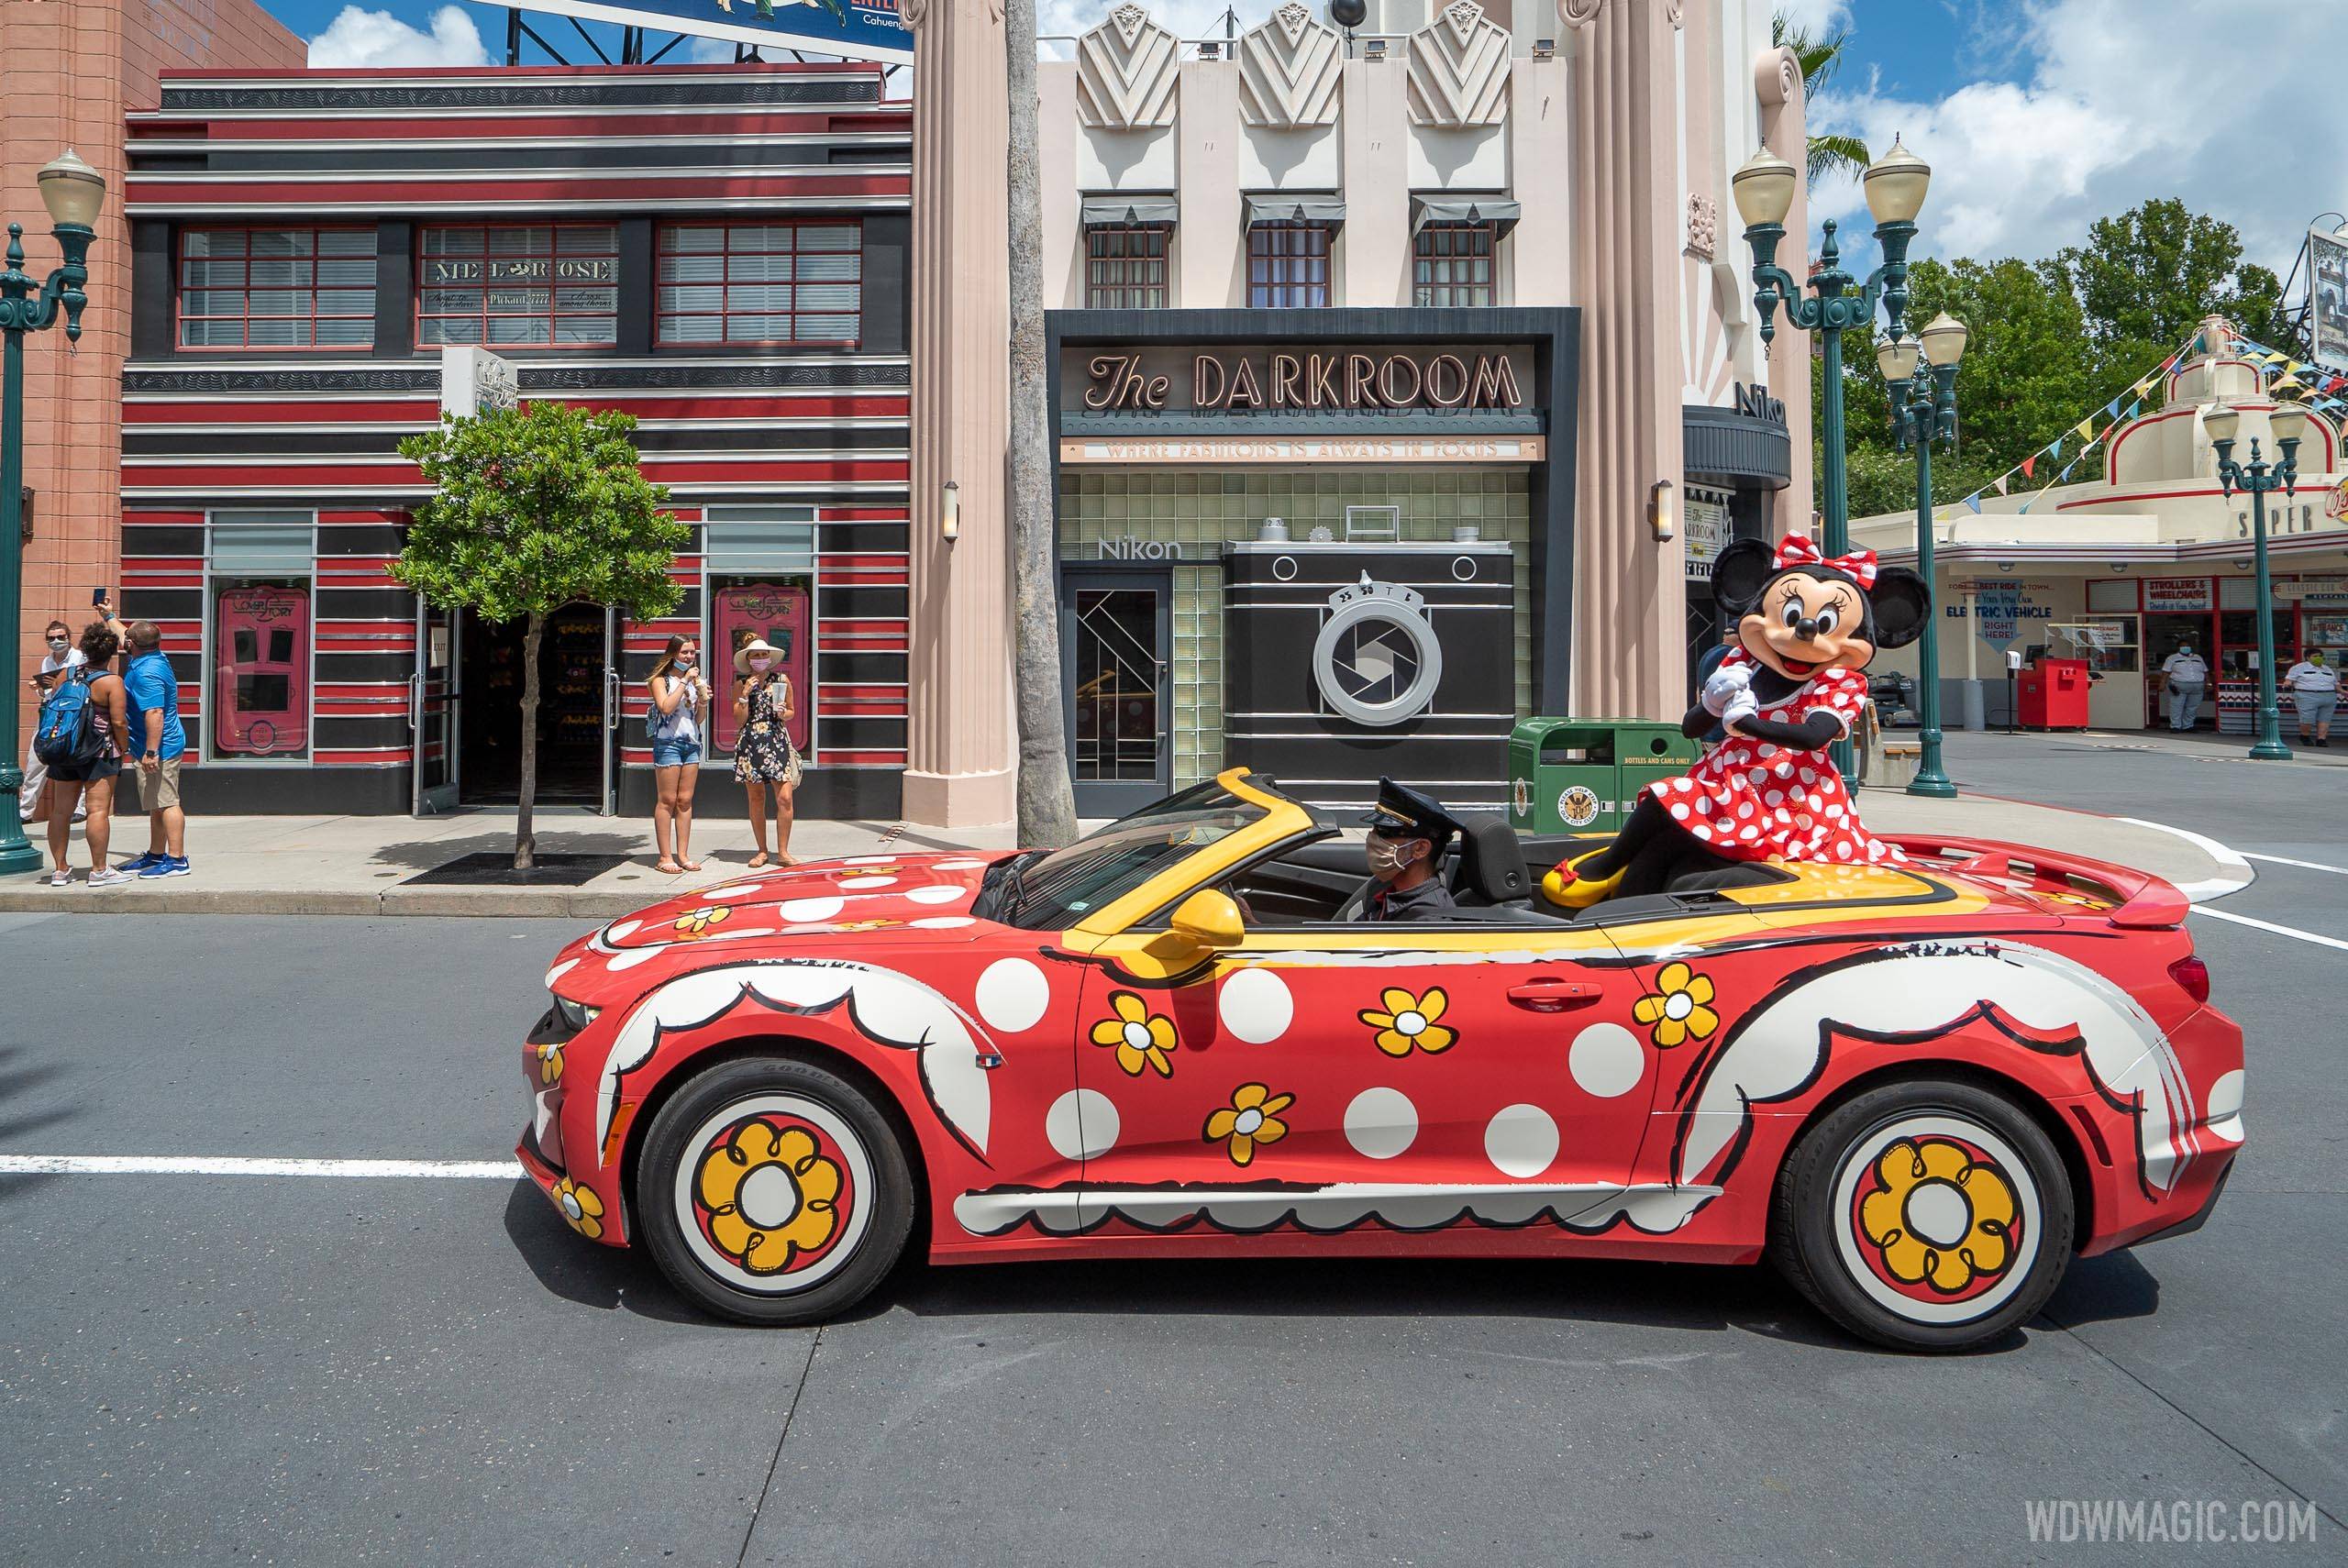 Minnie Mouse in the Mickey and Minnie cavalcade